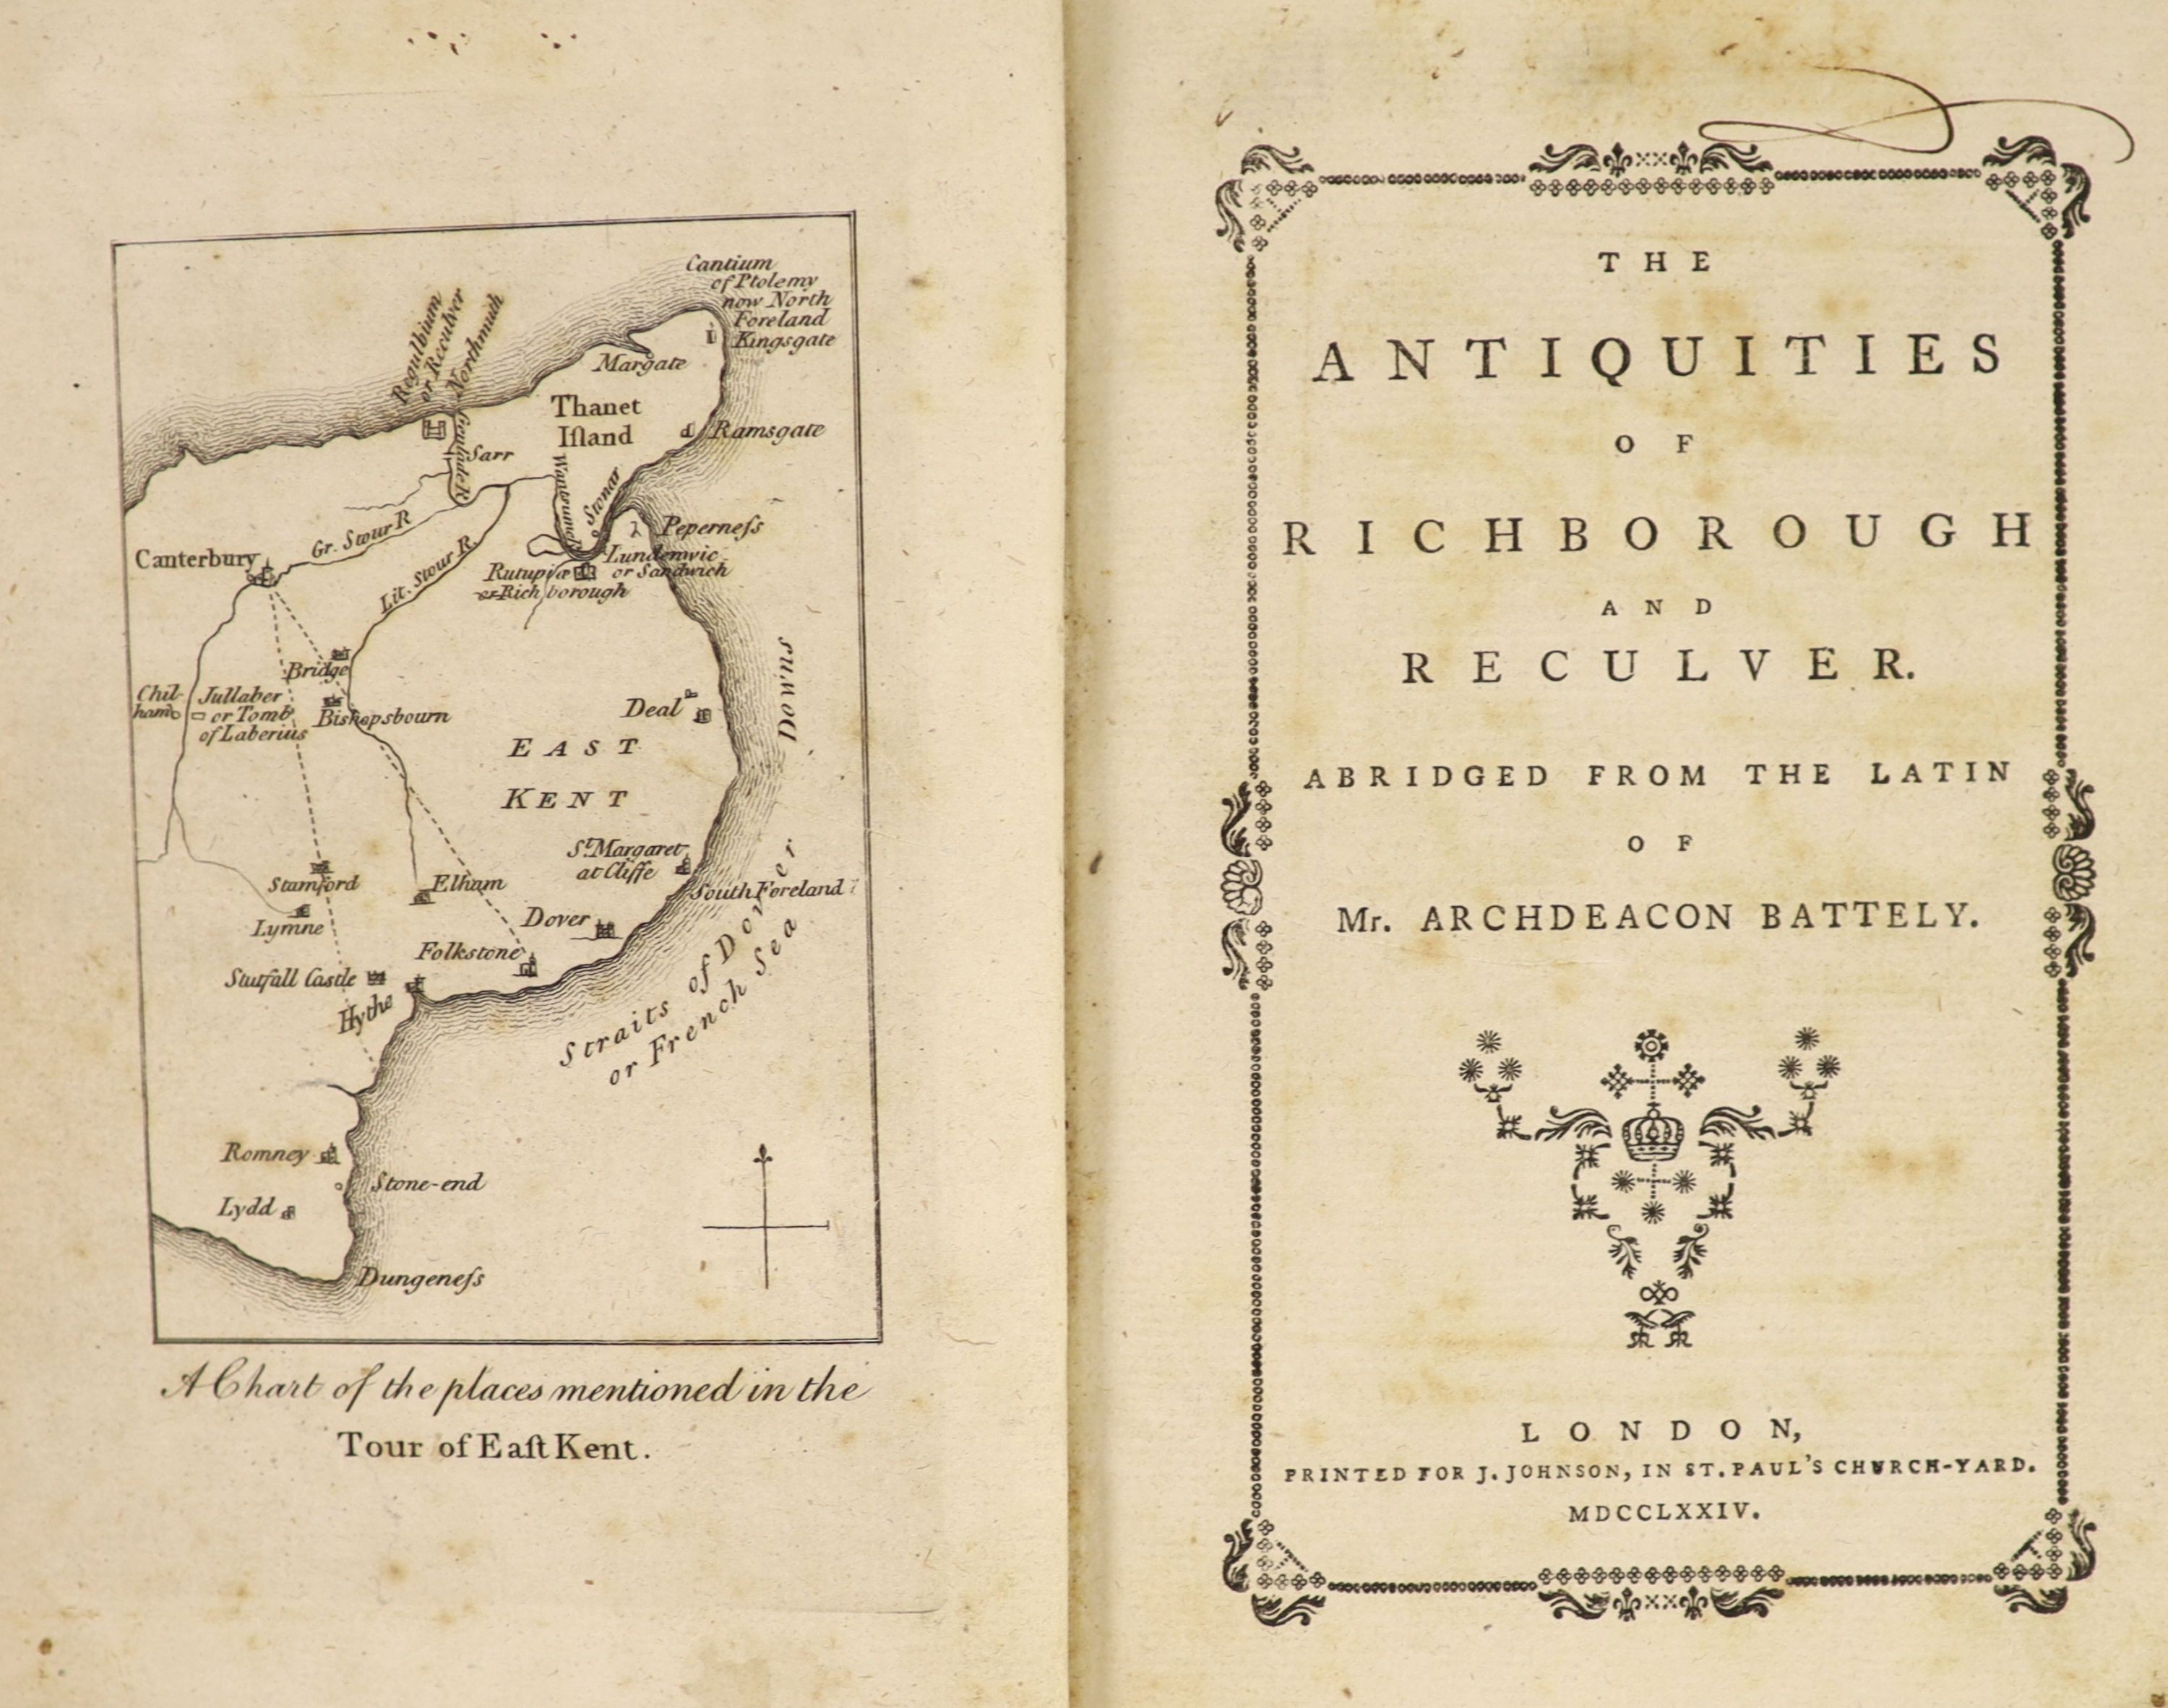 ° Battely, John. The Antiquities of Richborough and Reculver Abridged from the Latin of Archdeacon